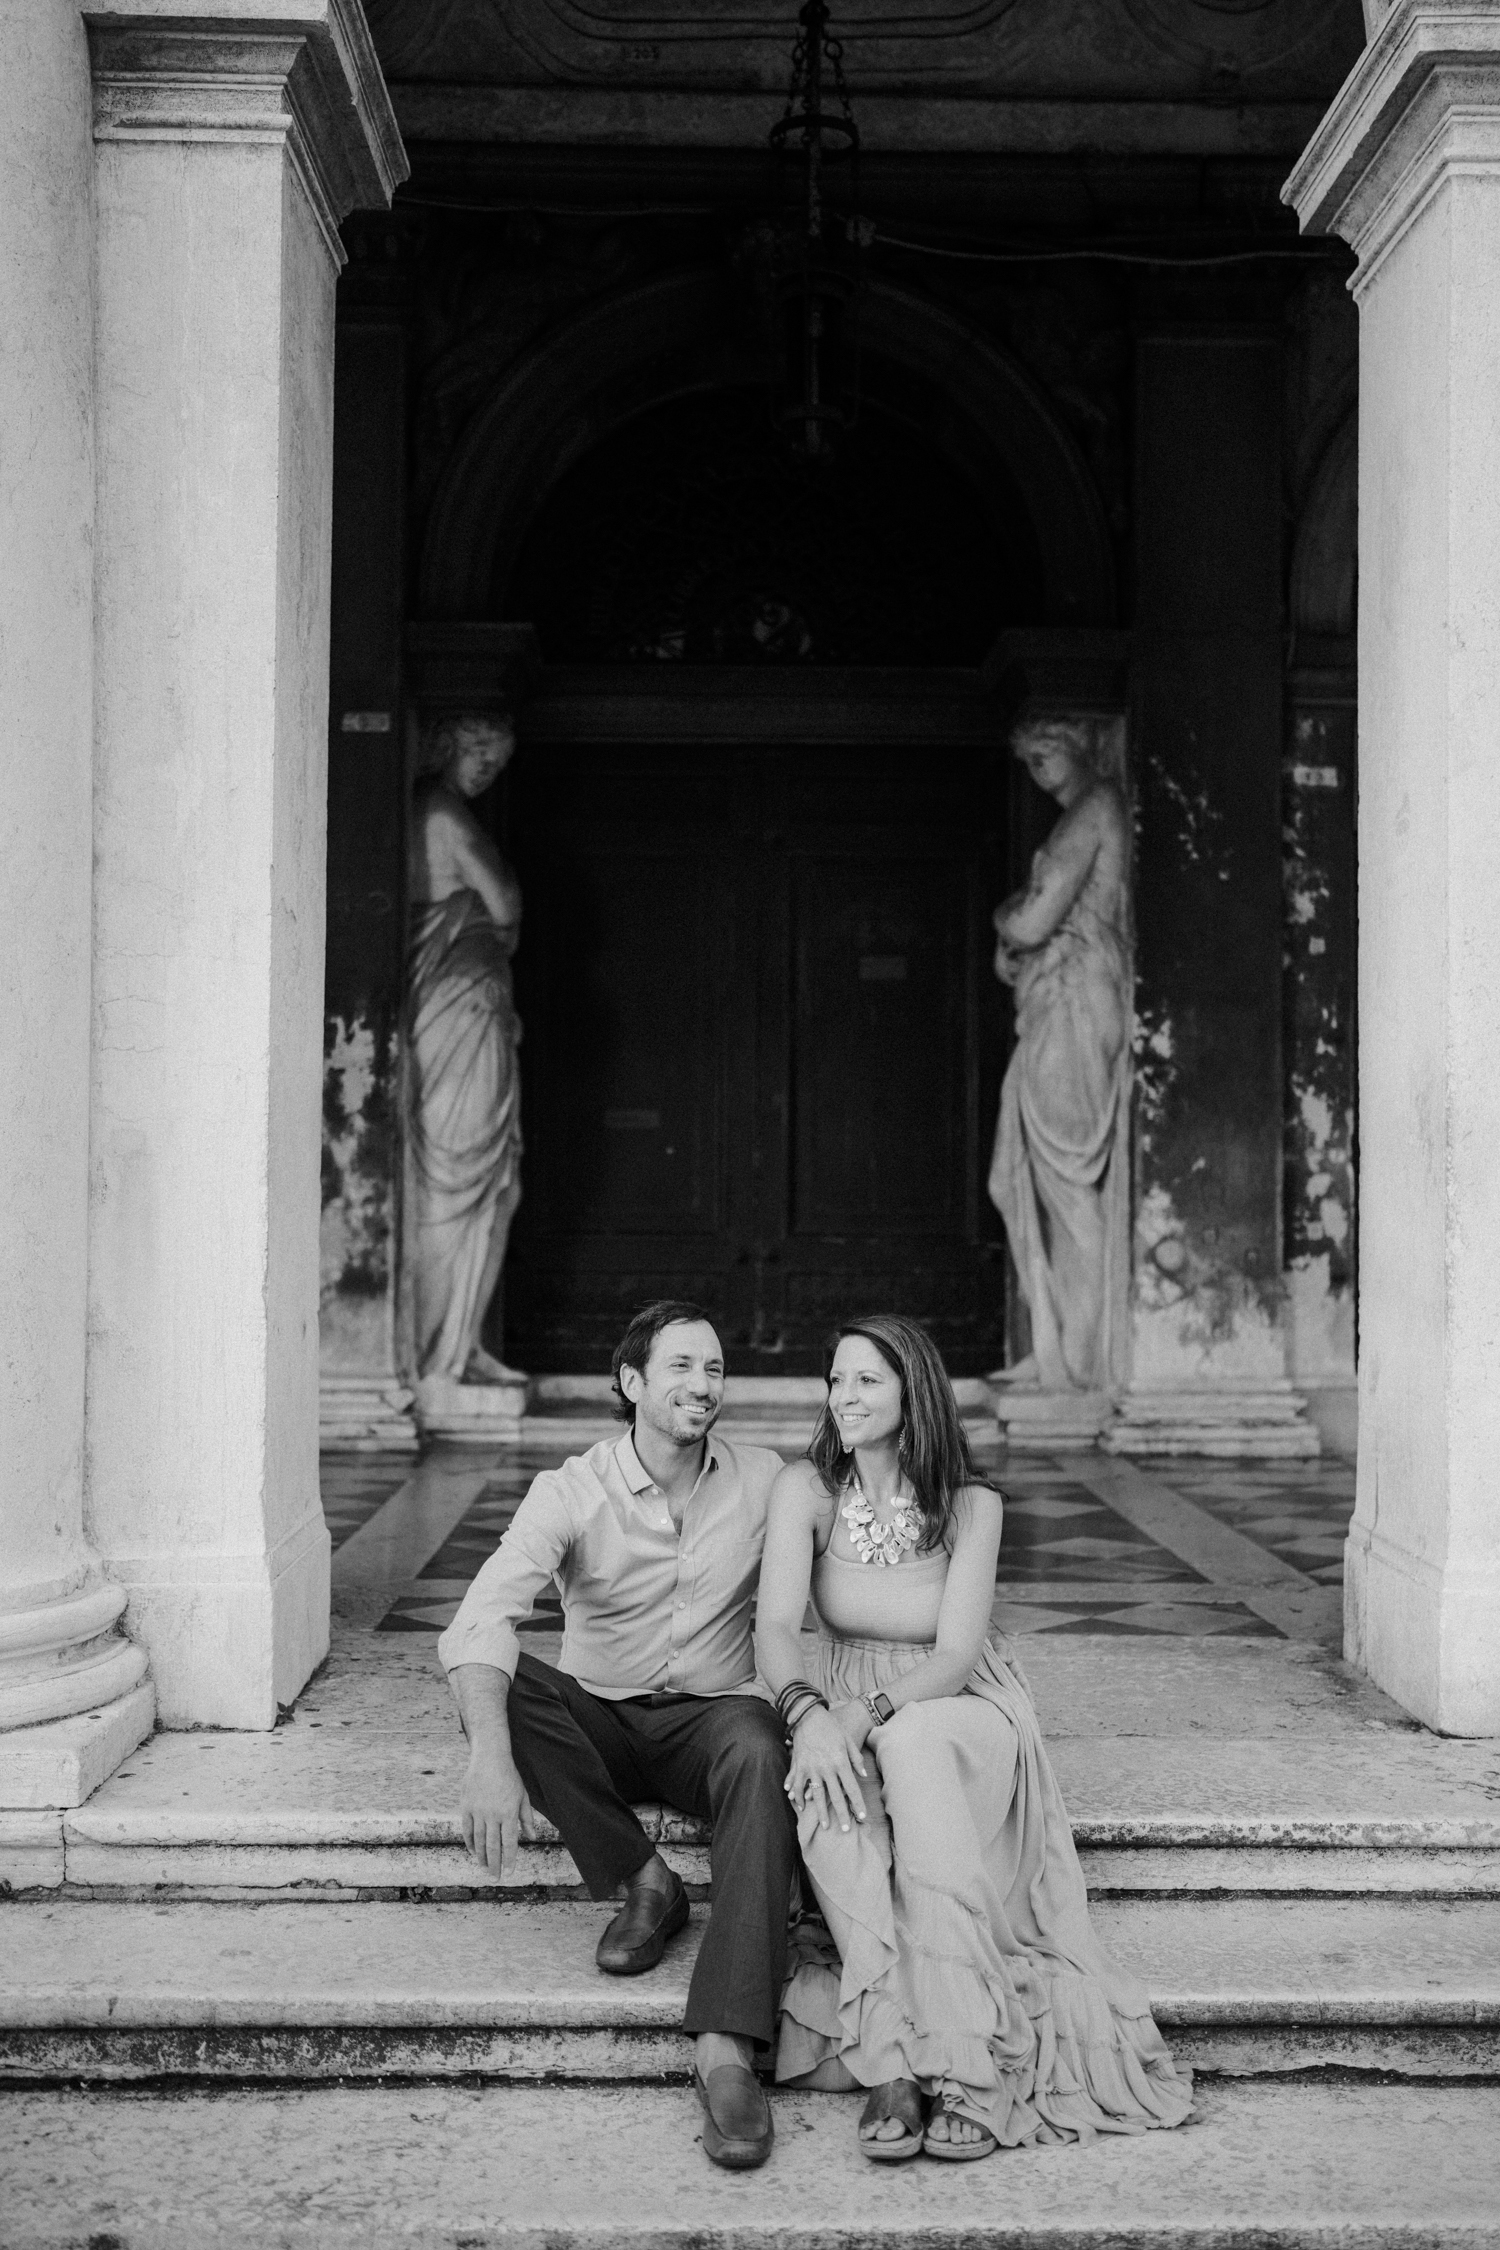 Creative candid Venice photographer for your engagement, proposal, honeymoon, anniversary, portrait, wedding, elopement, vacation photoshoot in Venice